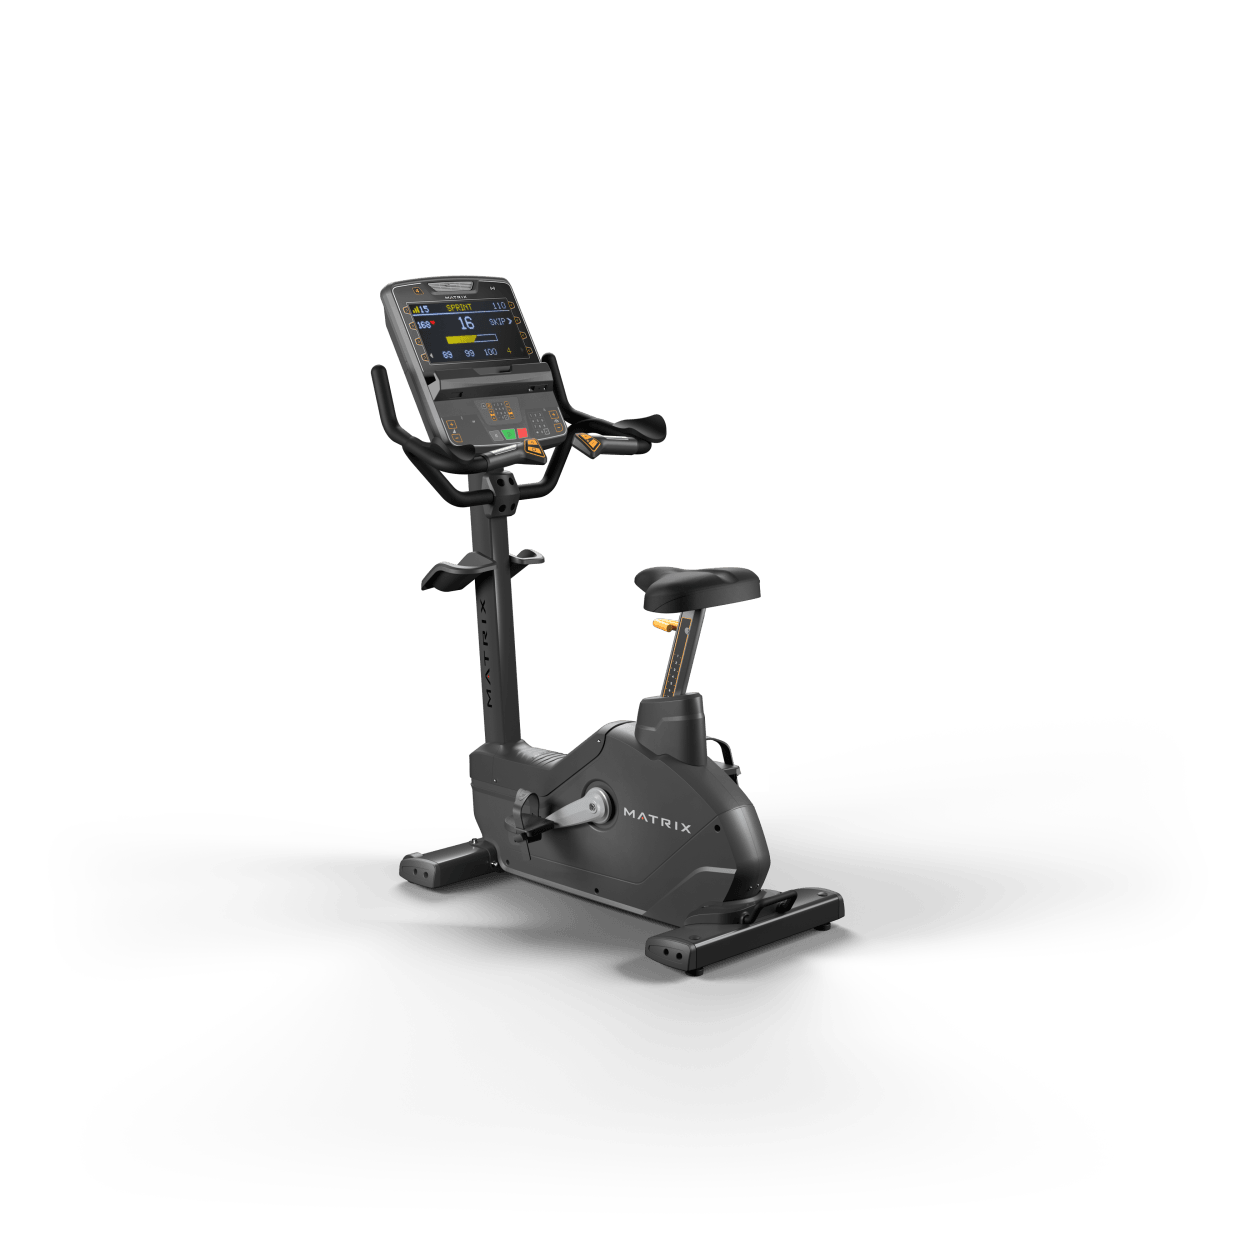 Matrix Fitness Endurance Upright Cycle with Premium LED Console full view | Fitness Experience